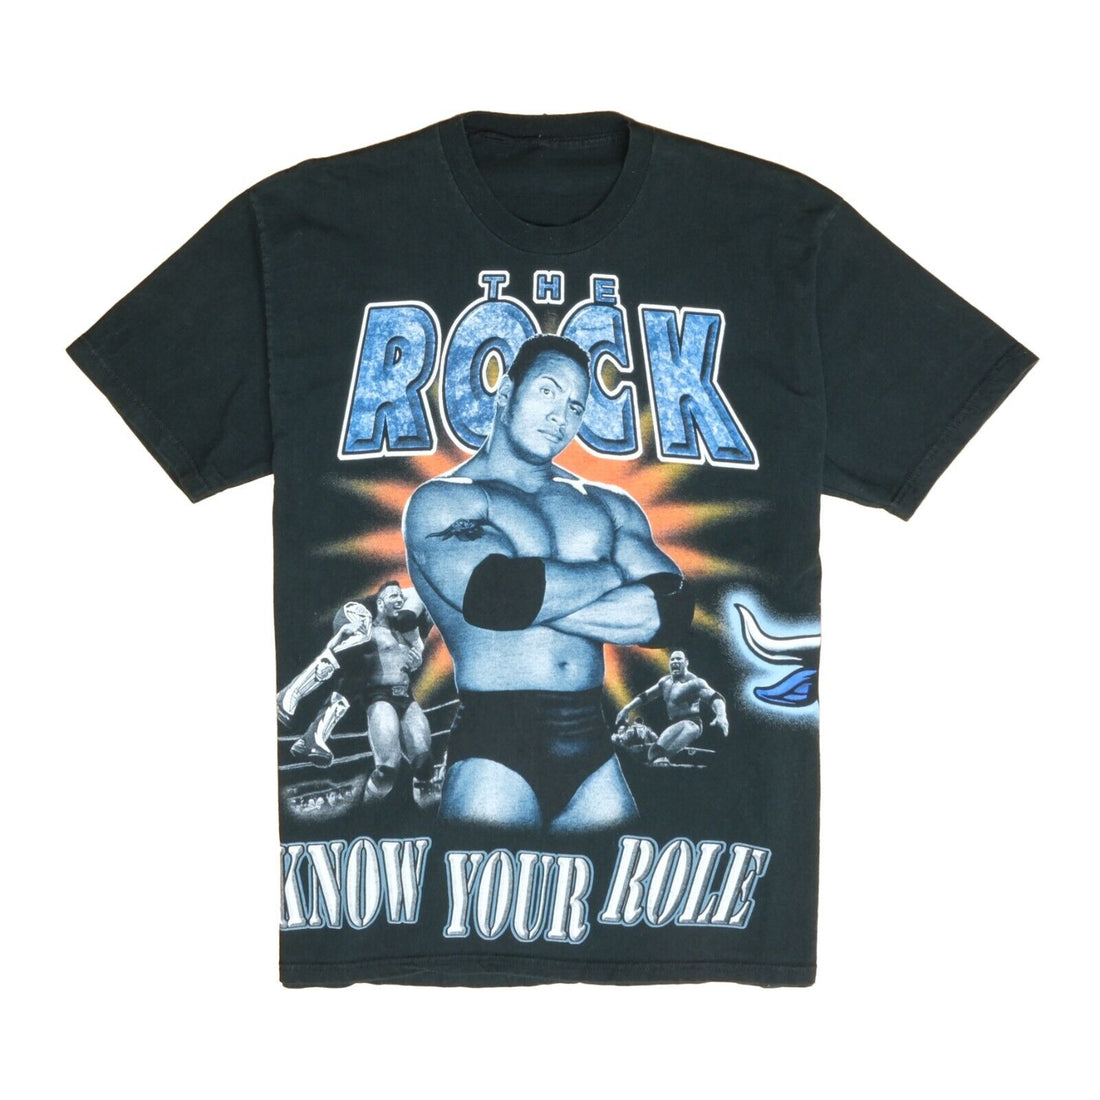 Vintage The Rock Know Your Role Shut Your Mouth Wrestling T-Shirt Large 1999 WWF